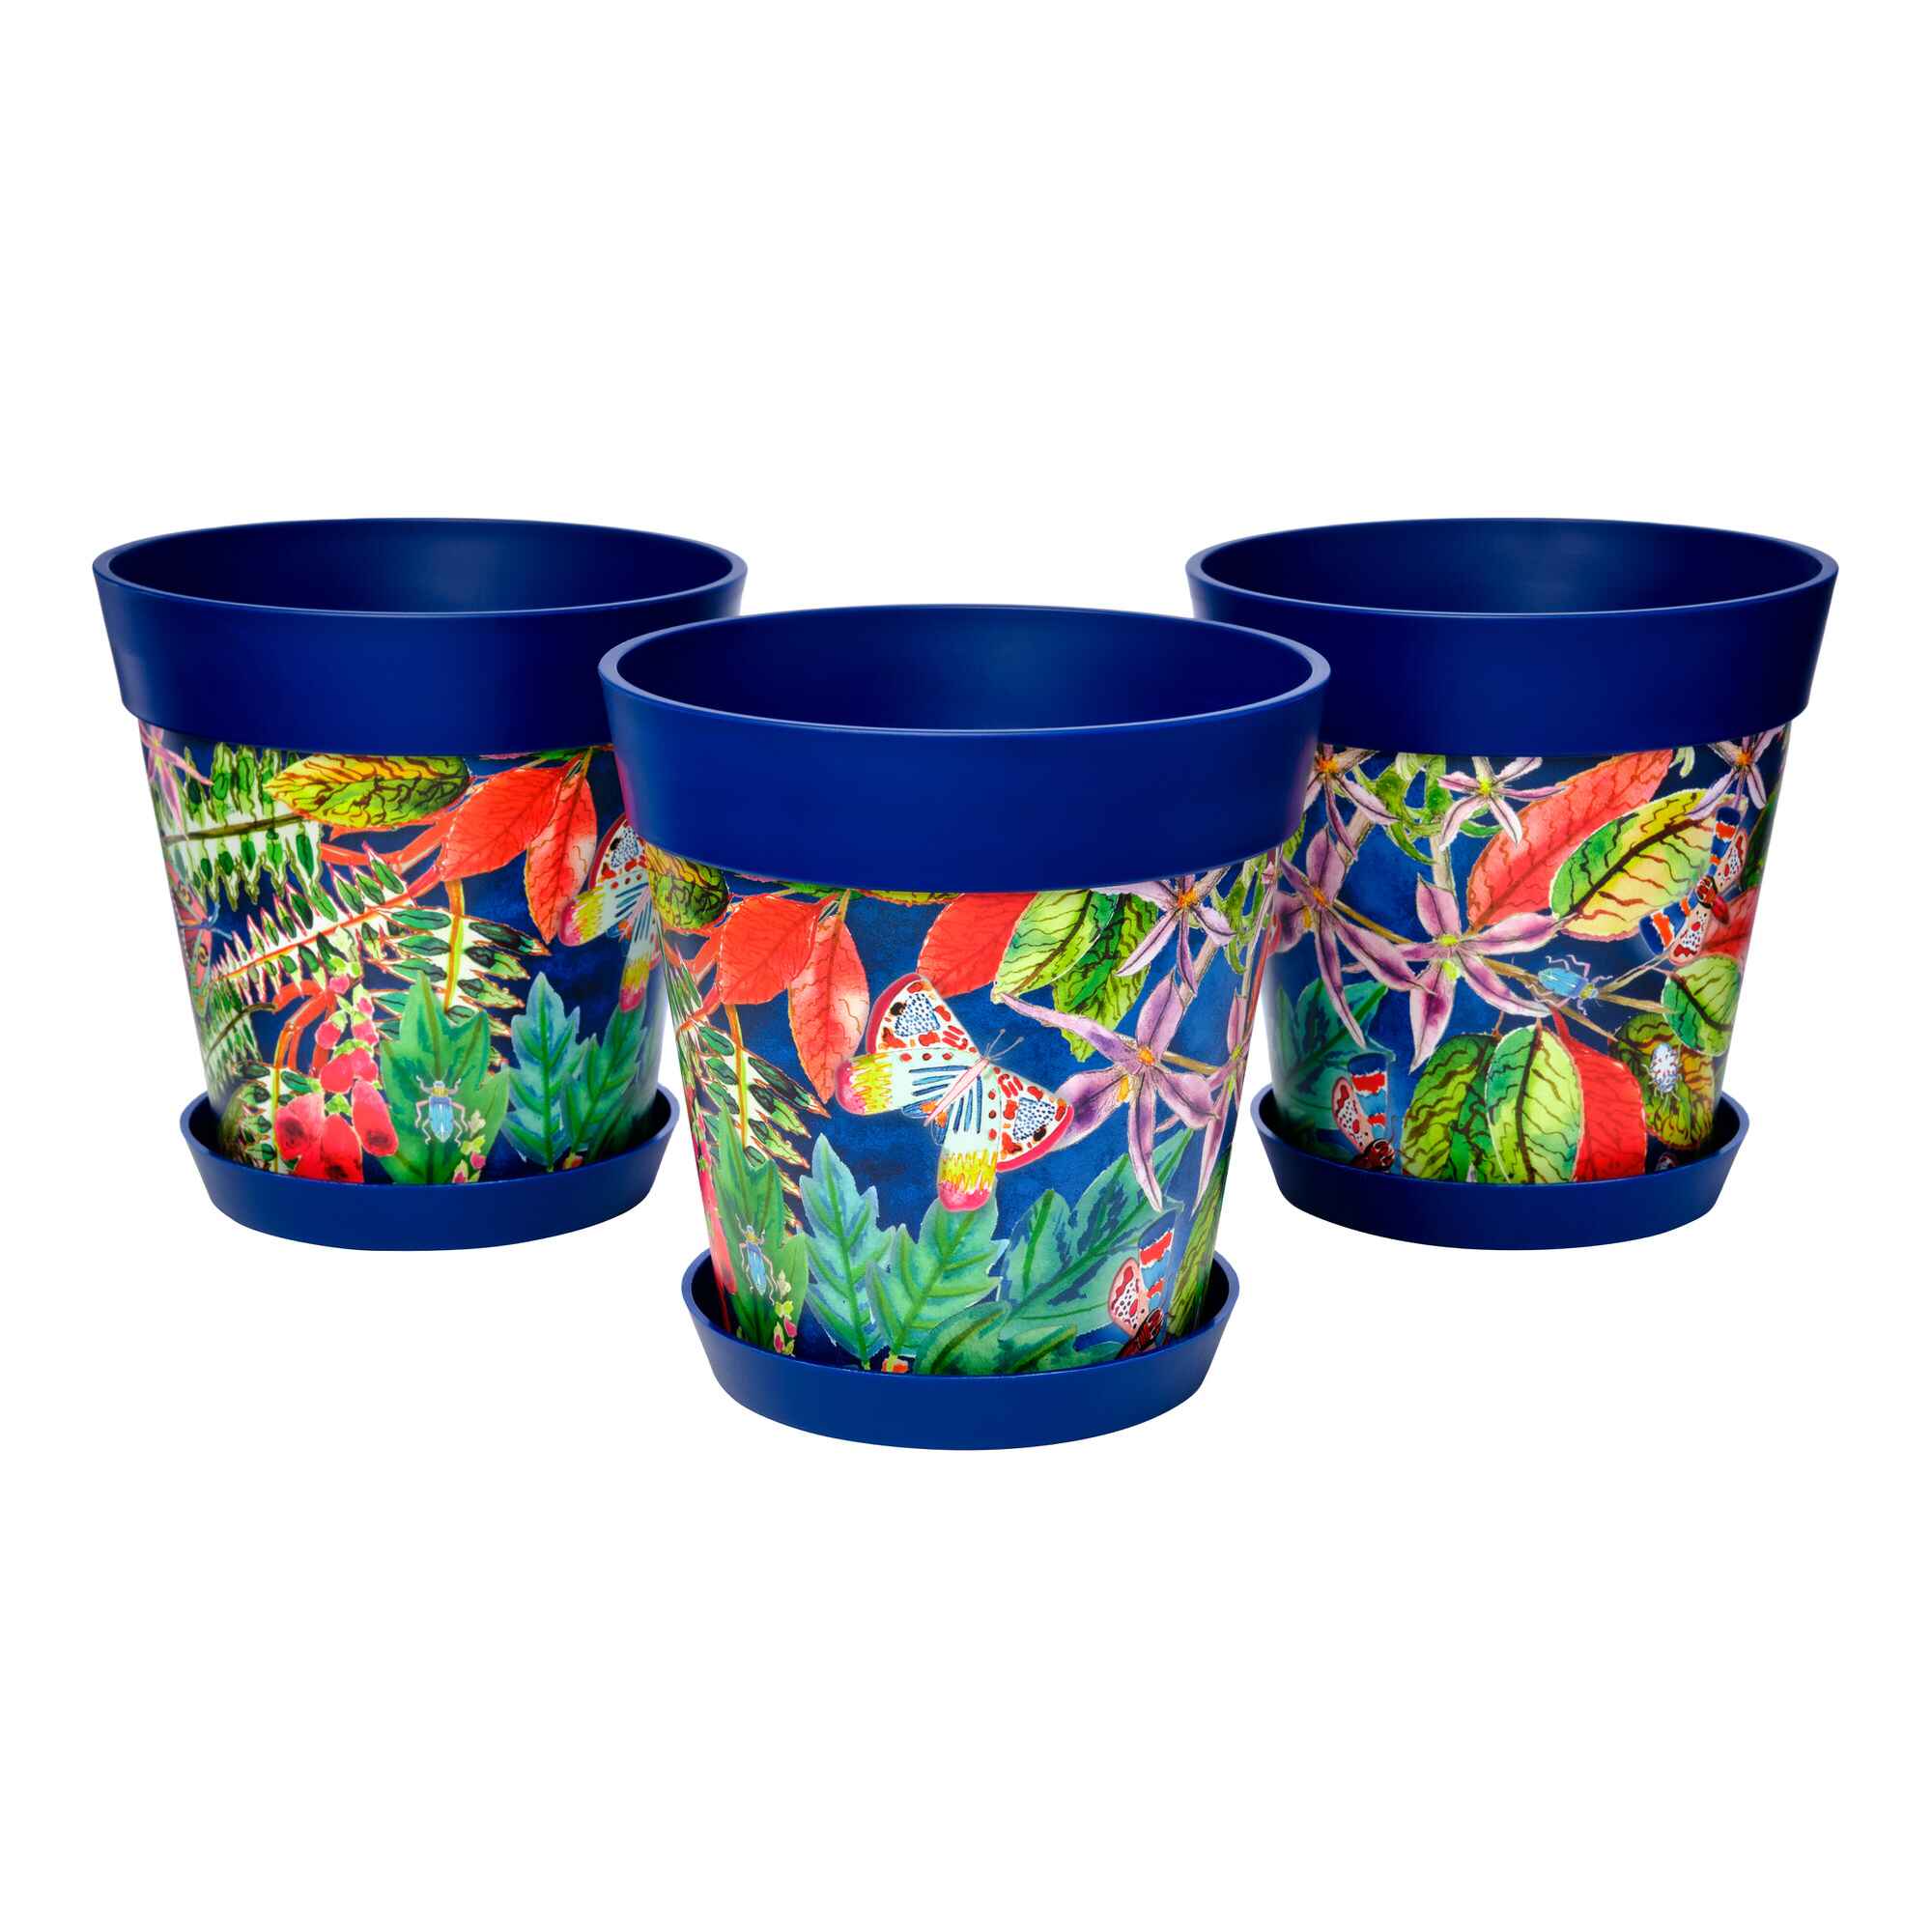 Picture of 3 Medium 22cm Blue Leaves and Butterflies Pattern Indoor/Outdoor Flower Pot and Saucers 